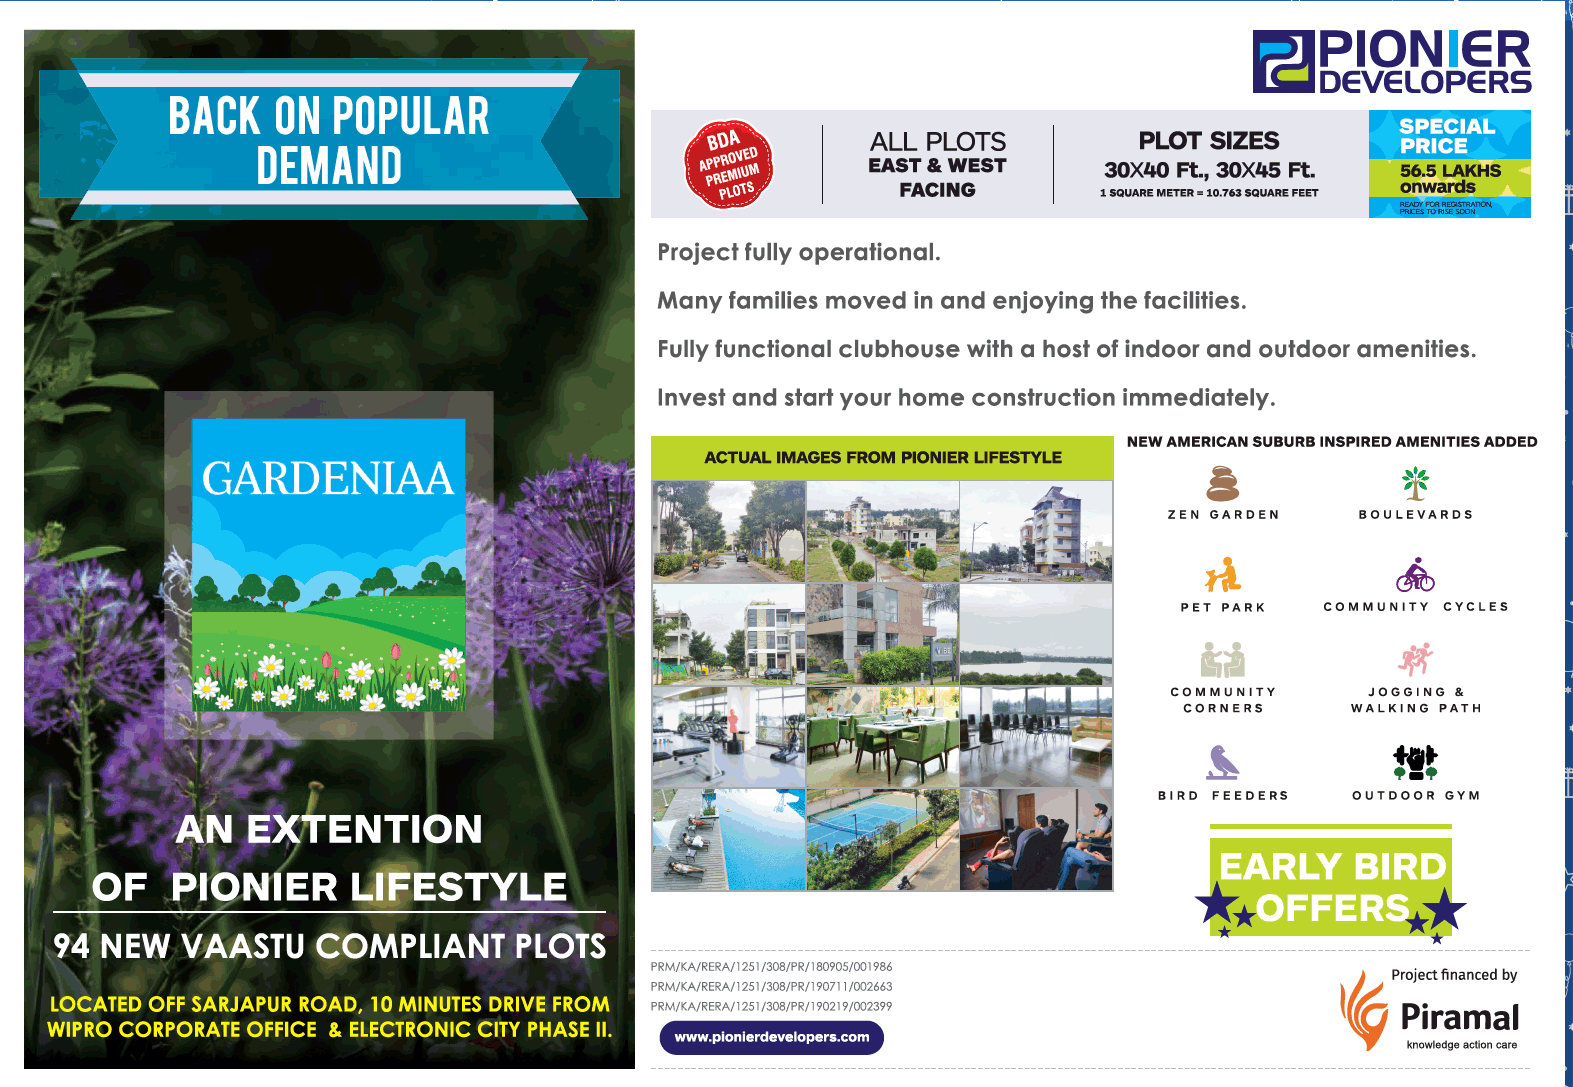 Special price Rs 56.5 Lac onwards at Pioneer Gardenia, Bangalore